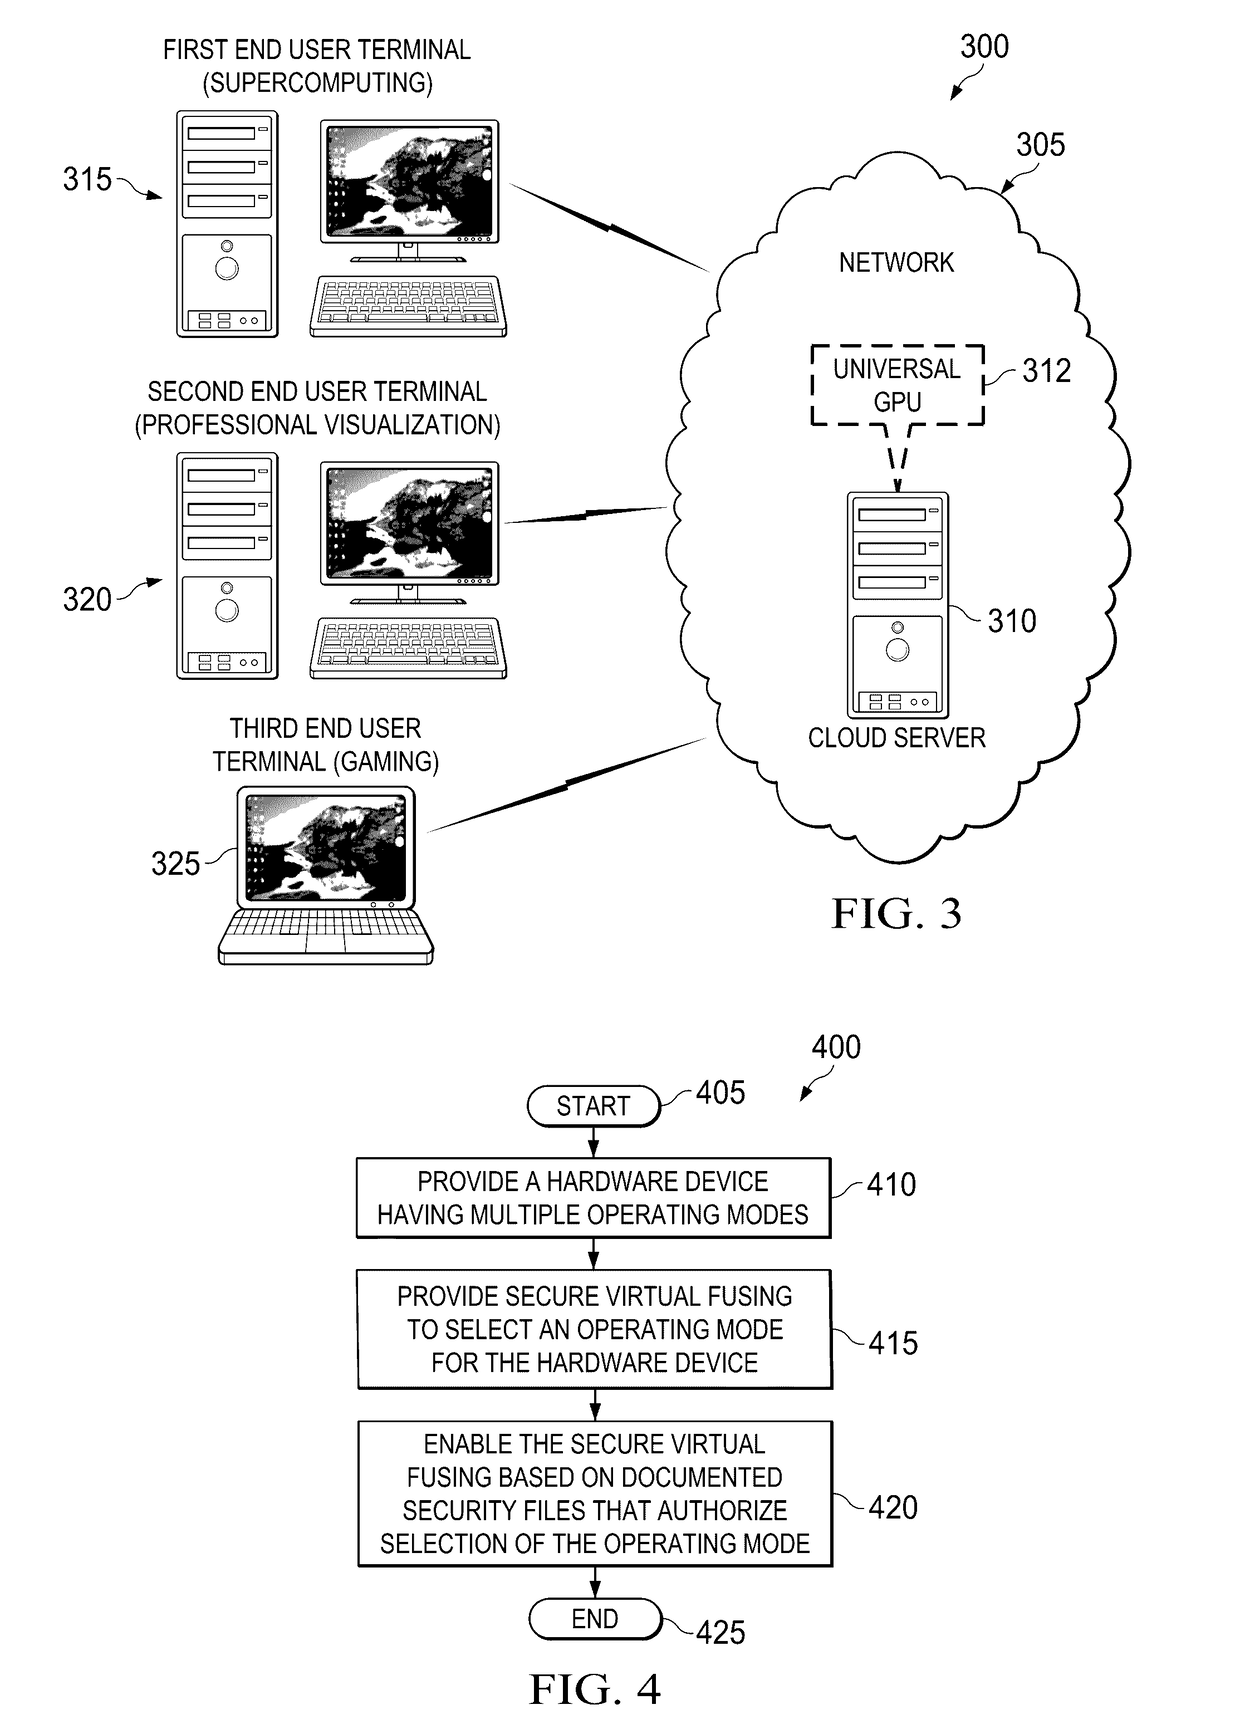 Secure reconfiguration of hardware device operating features